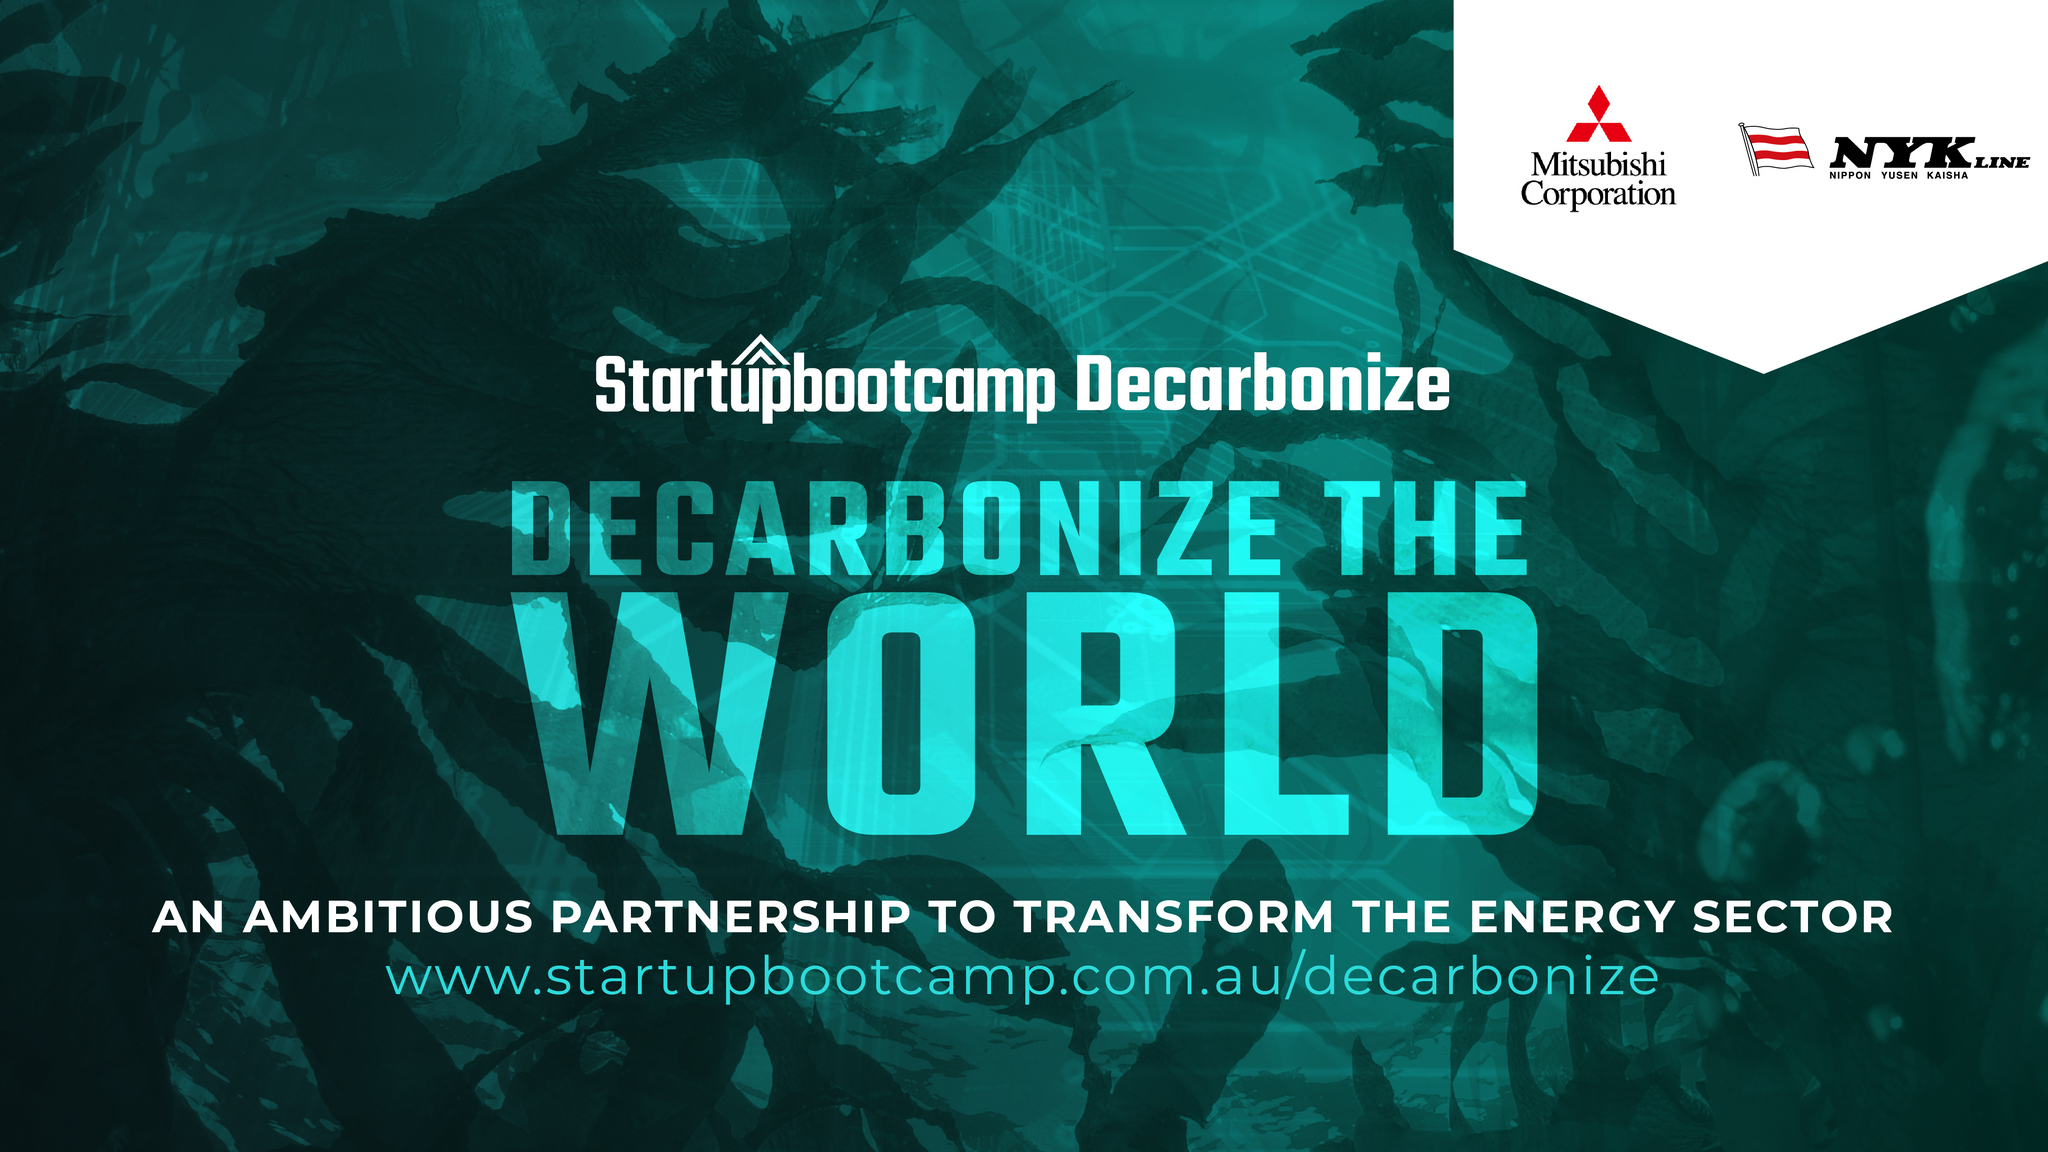 Startupbootcamp Decarbonize: An Ambitious Partnership to Transform the Energy Sector